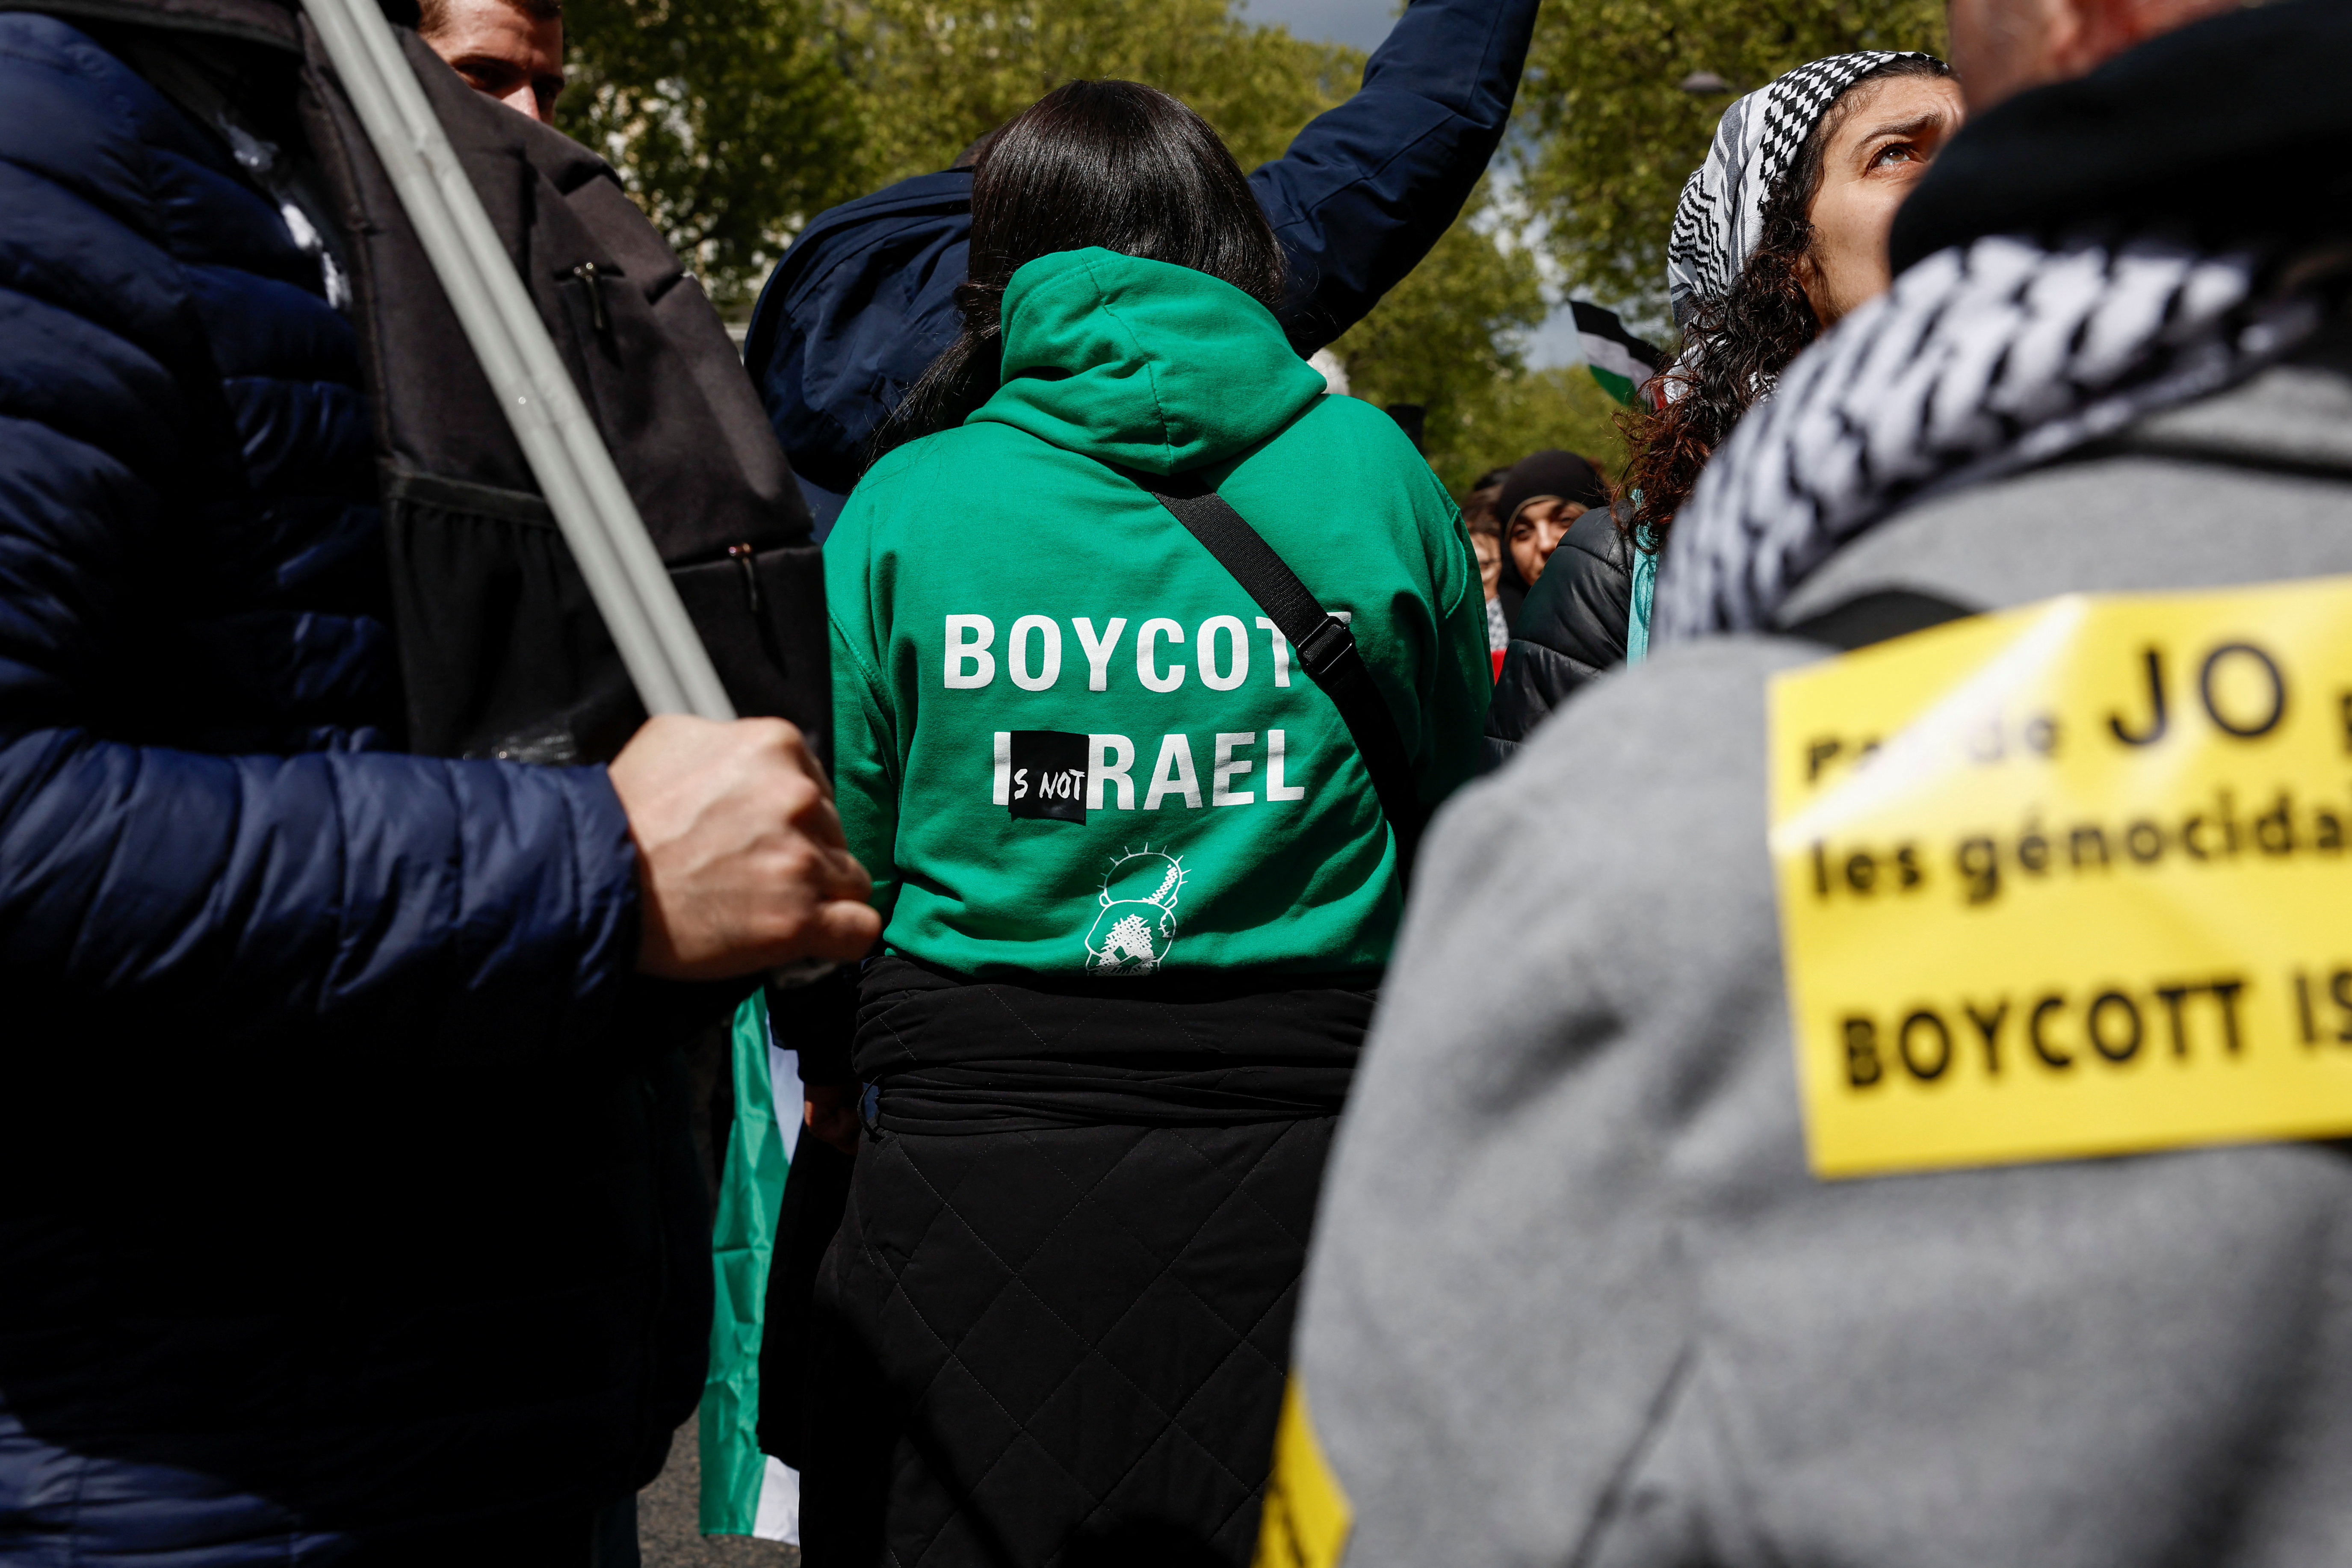 People march in a protest against racism, Islamophobia and the protection of children, in Paris